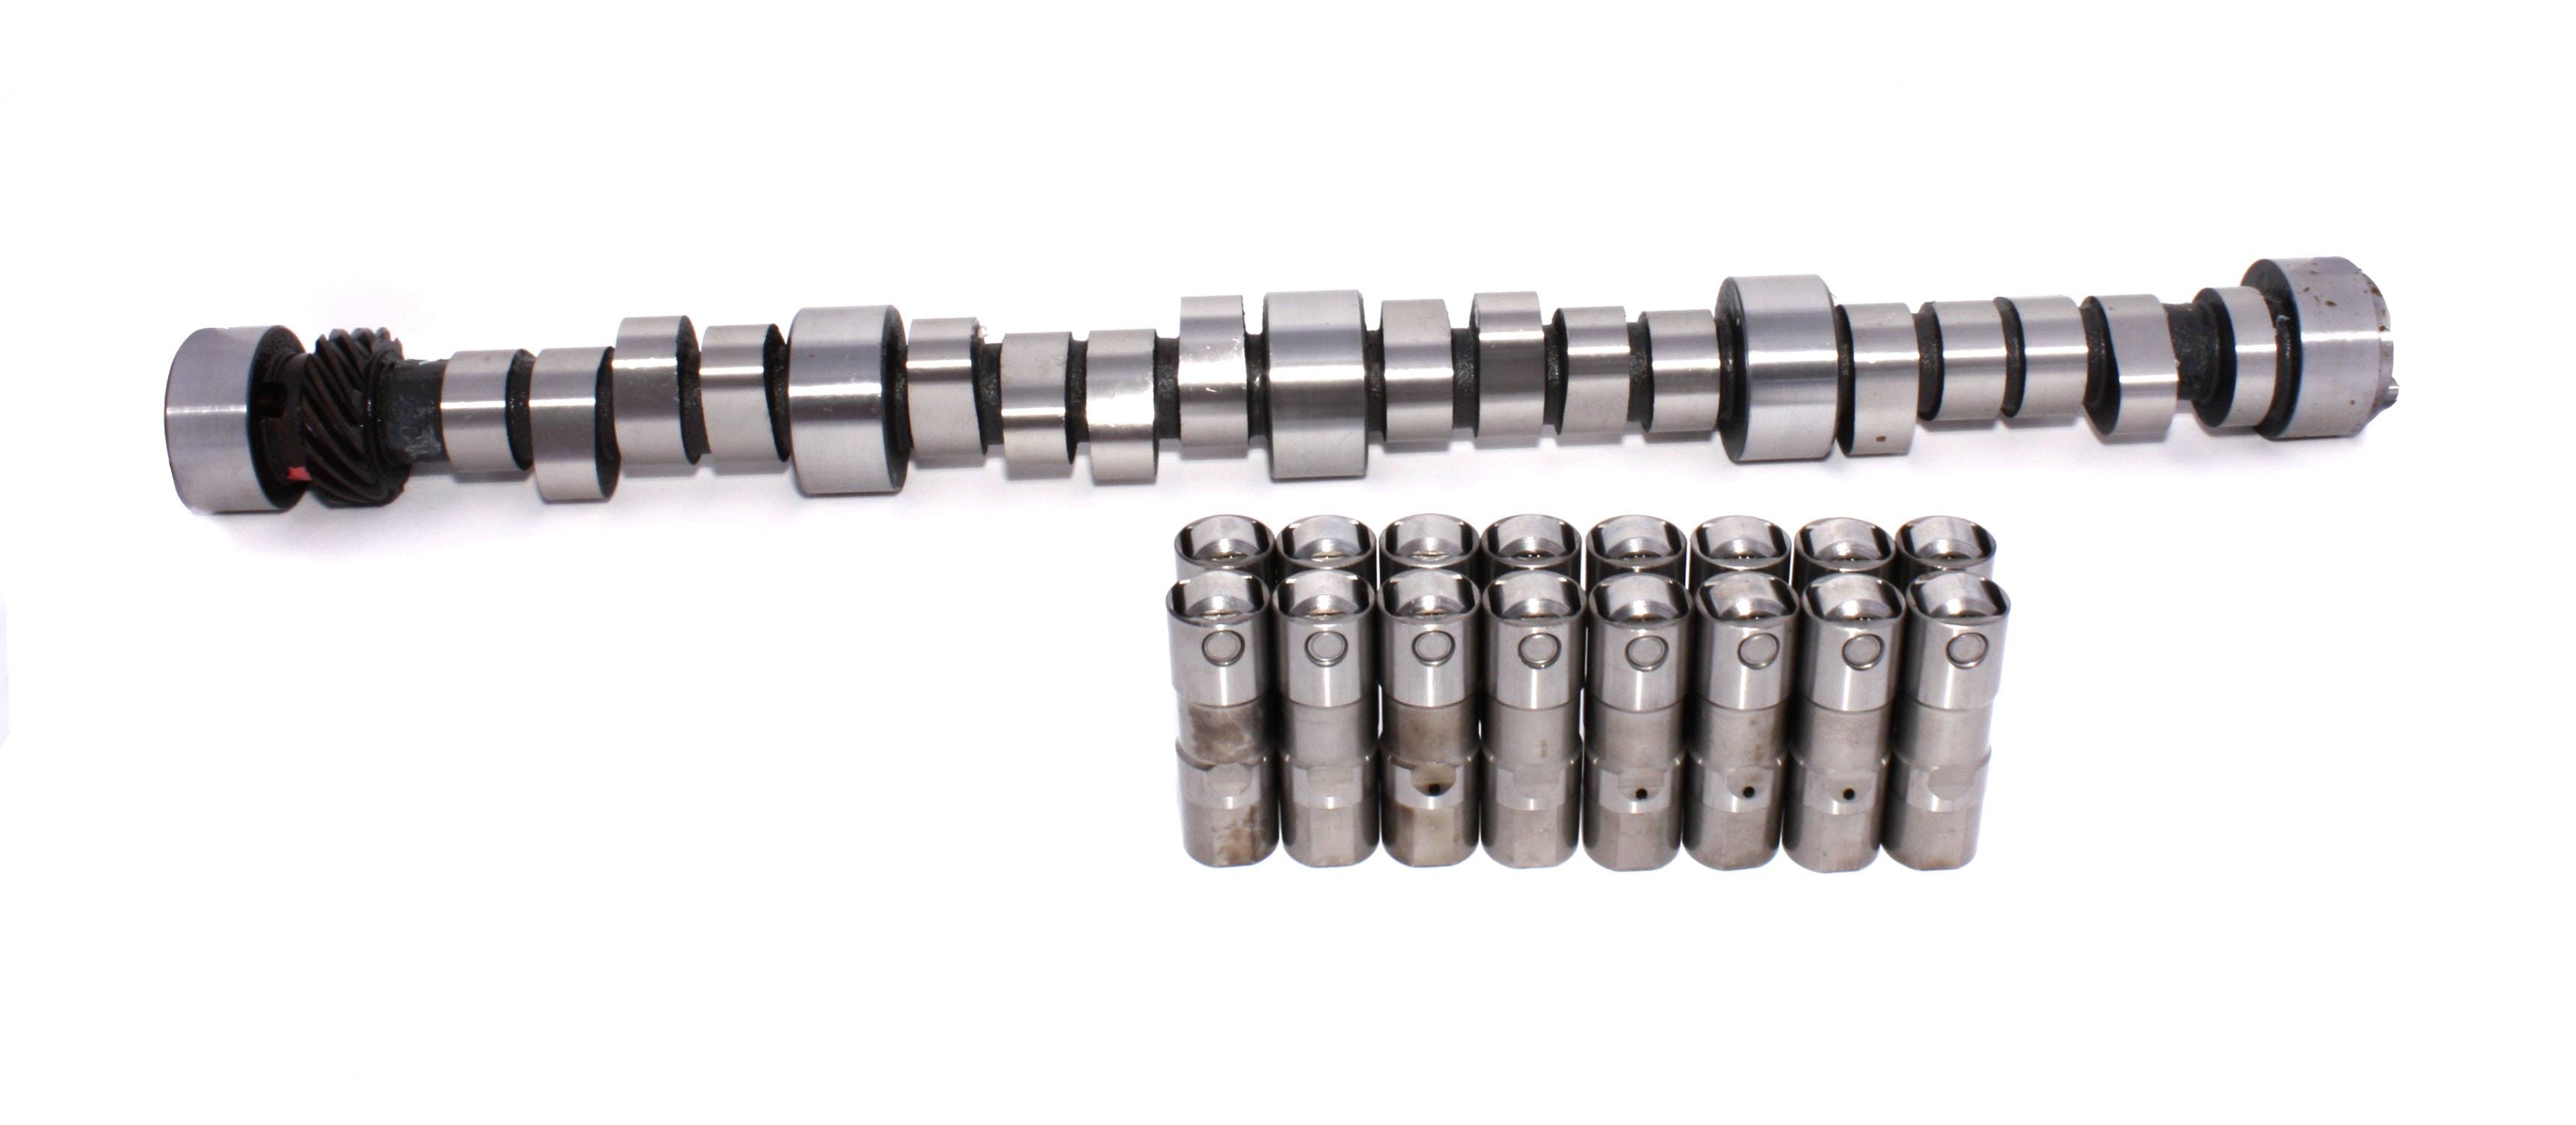 Competition Cams CL01-602-8 BIG MUTHA THUMPR 243/257 HYD ROLLER CAM/LIFTER KIT CHEVY BIG BLOCK GEN VI